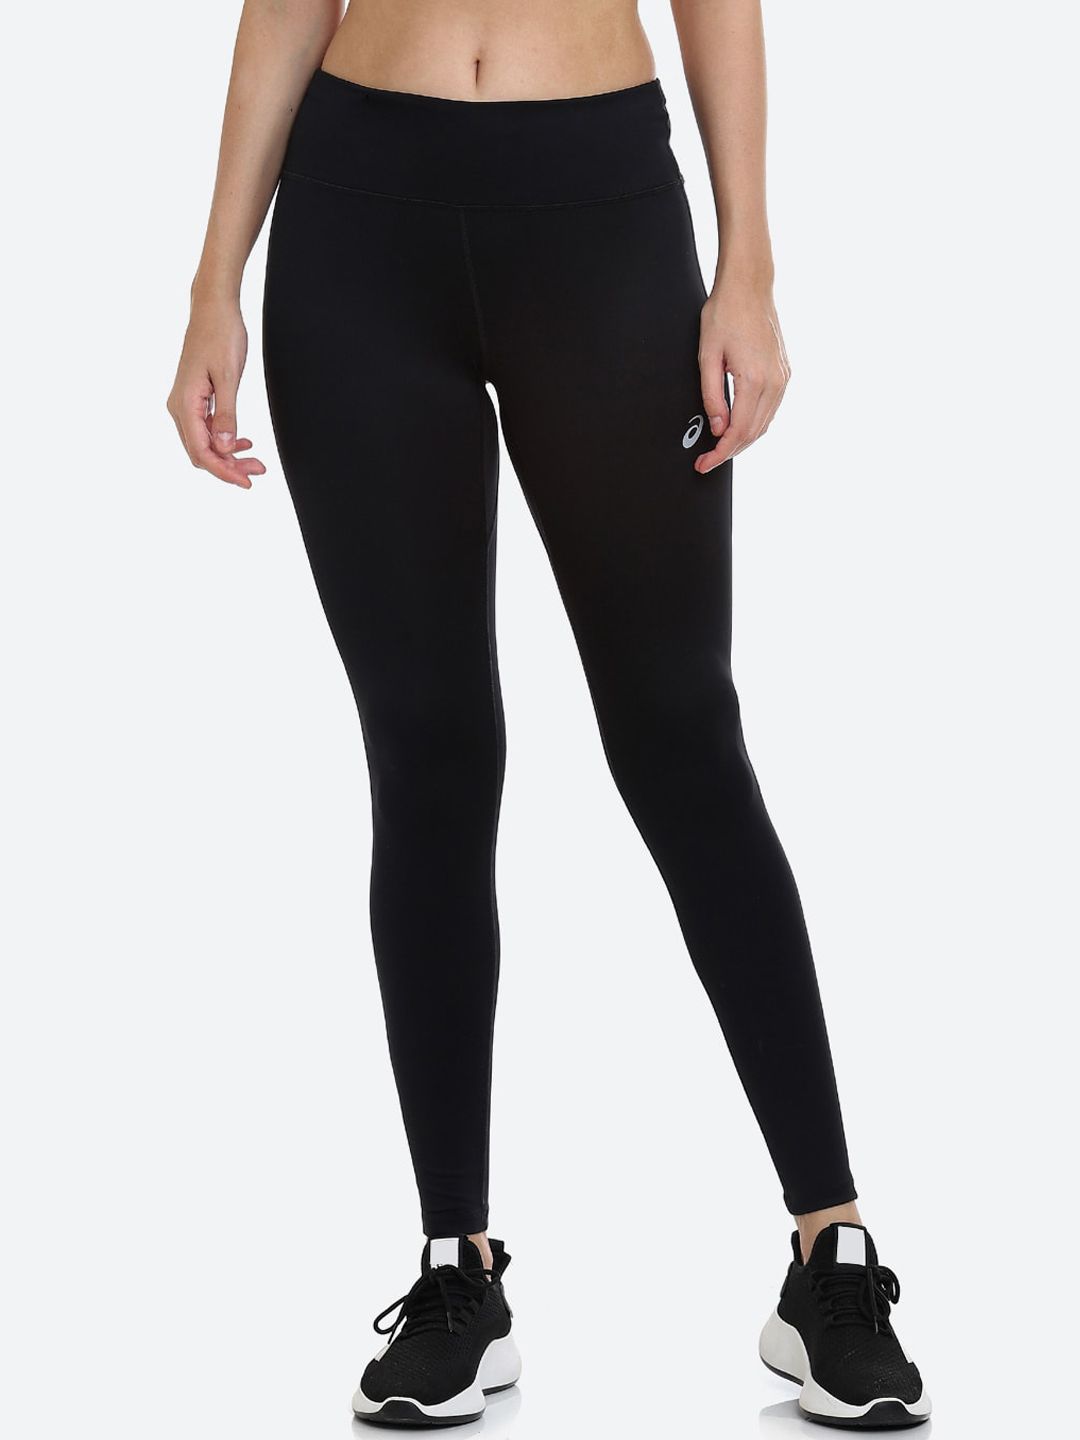 ASICS Women Black Solid Silver Tights Price in India